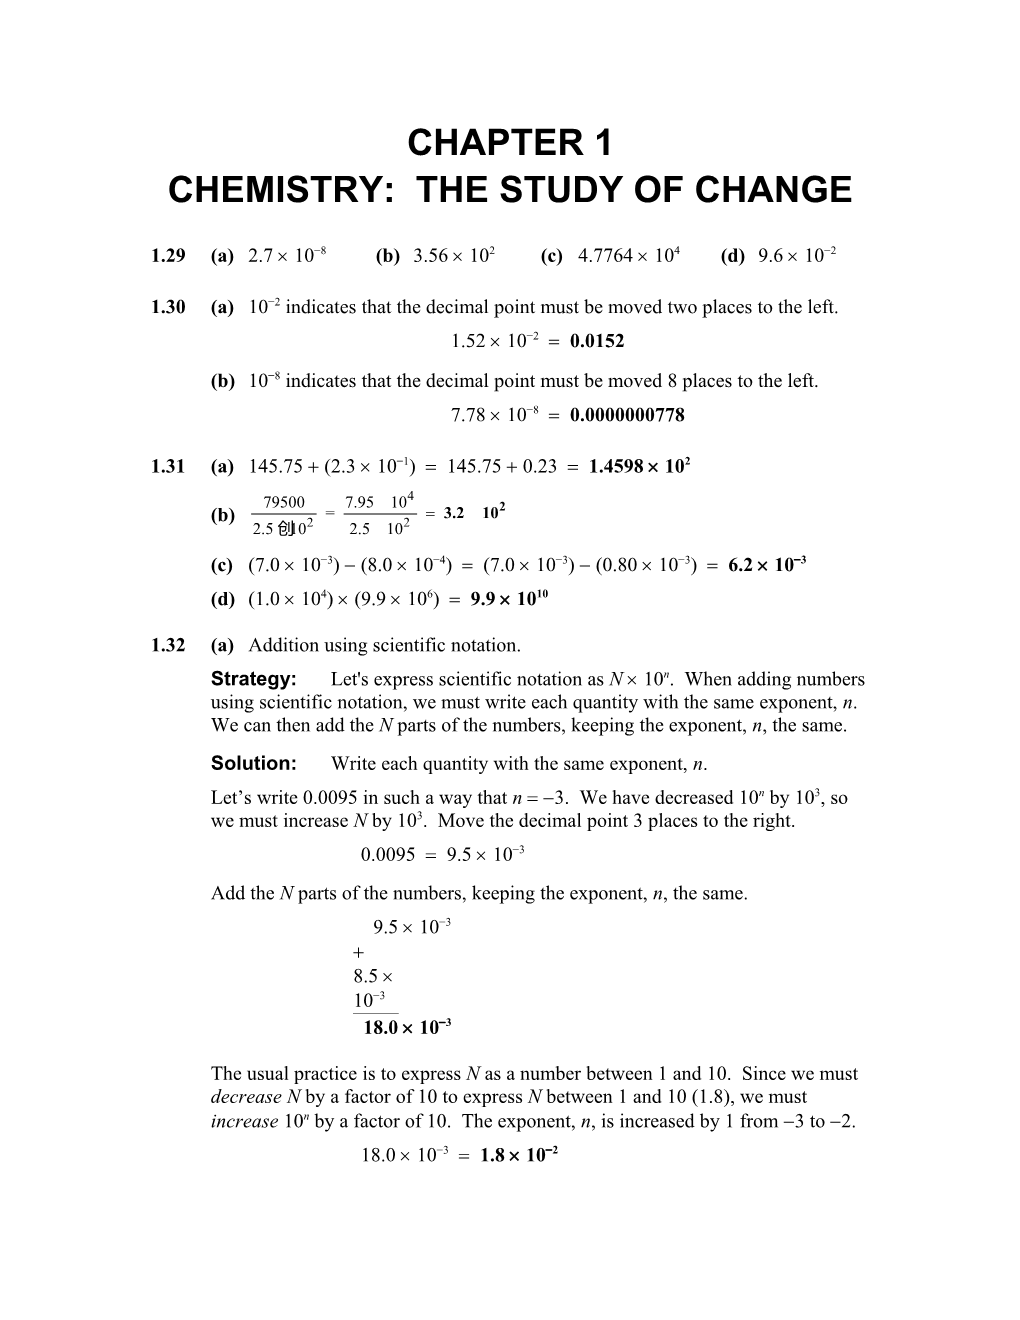 Chemistry: the Study of Change